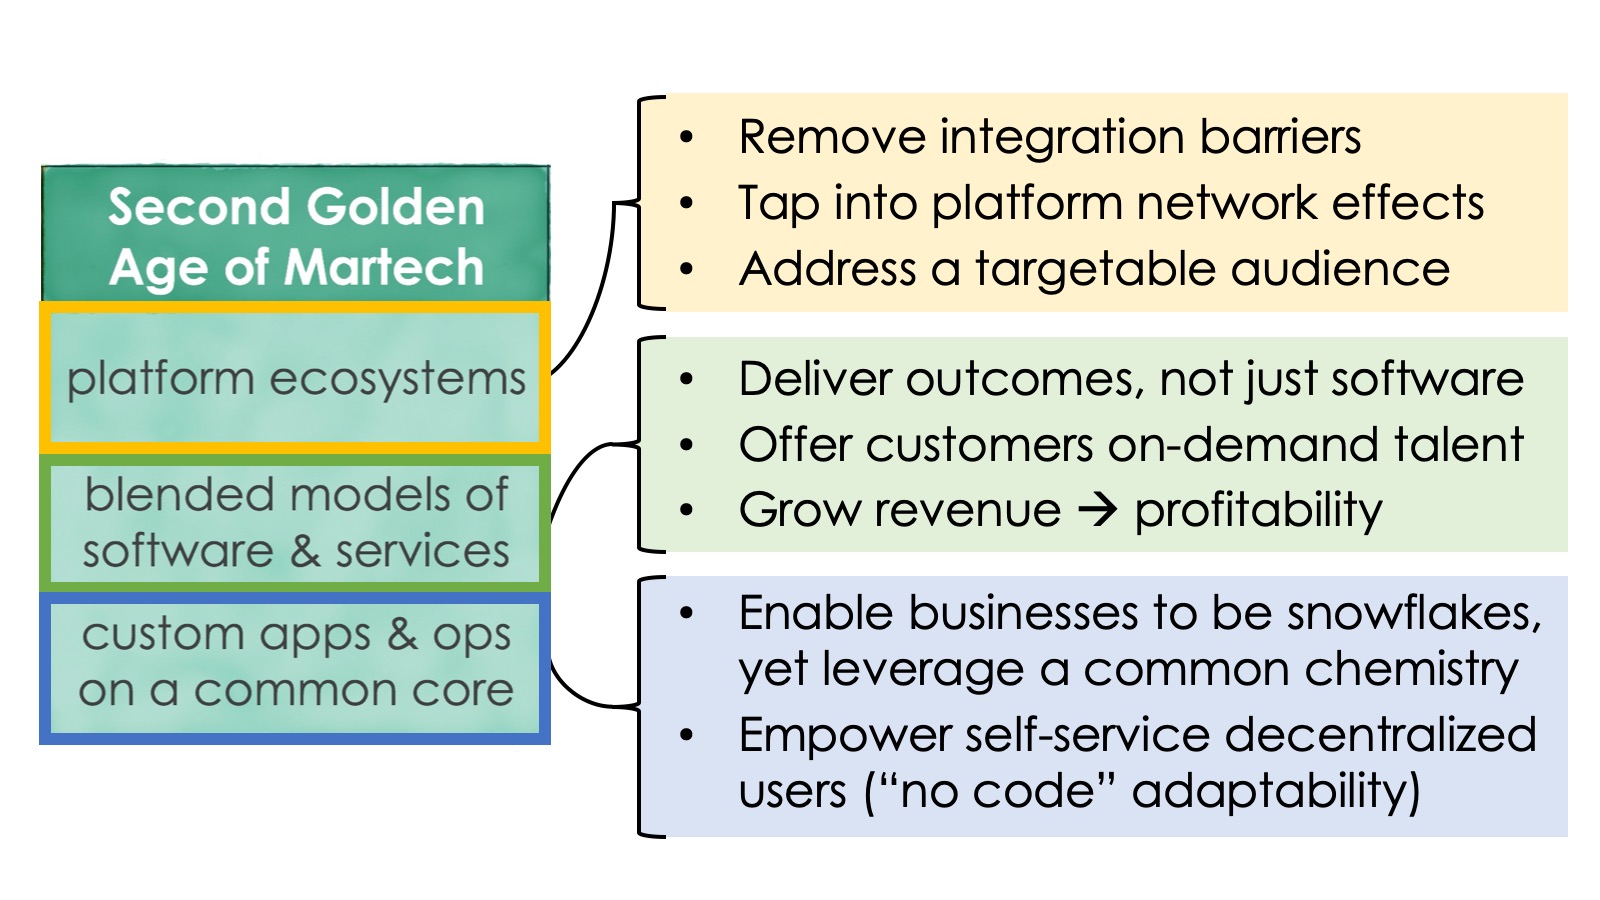 Second Golden Age of Martech